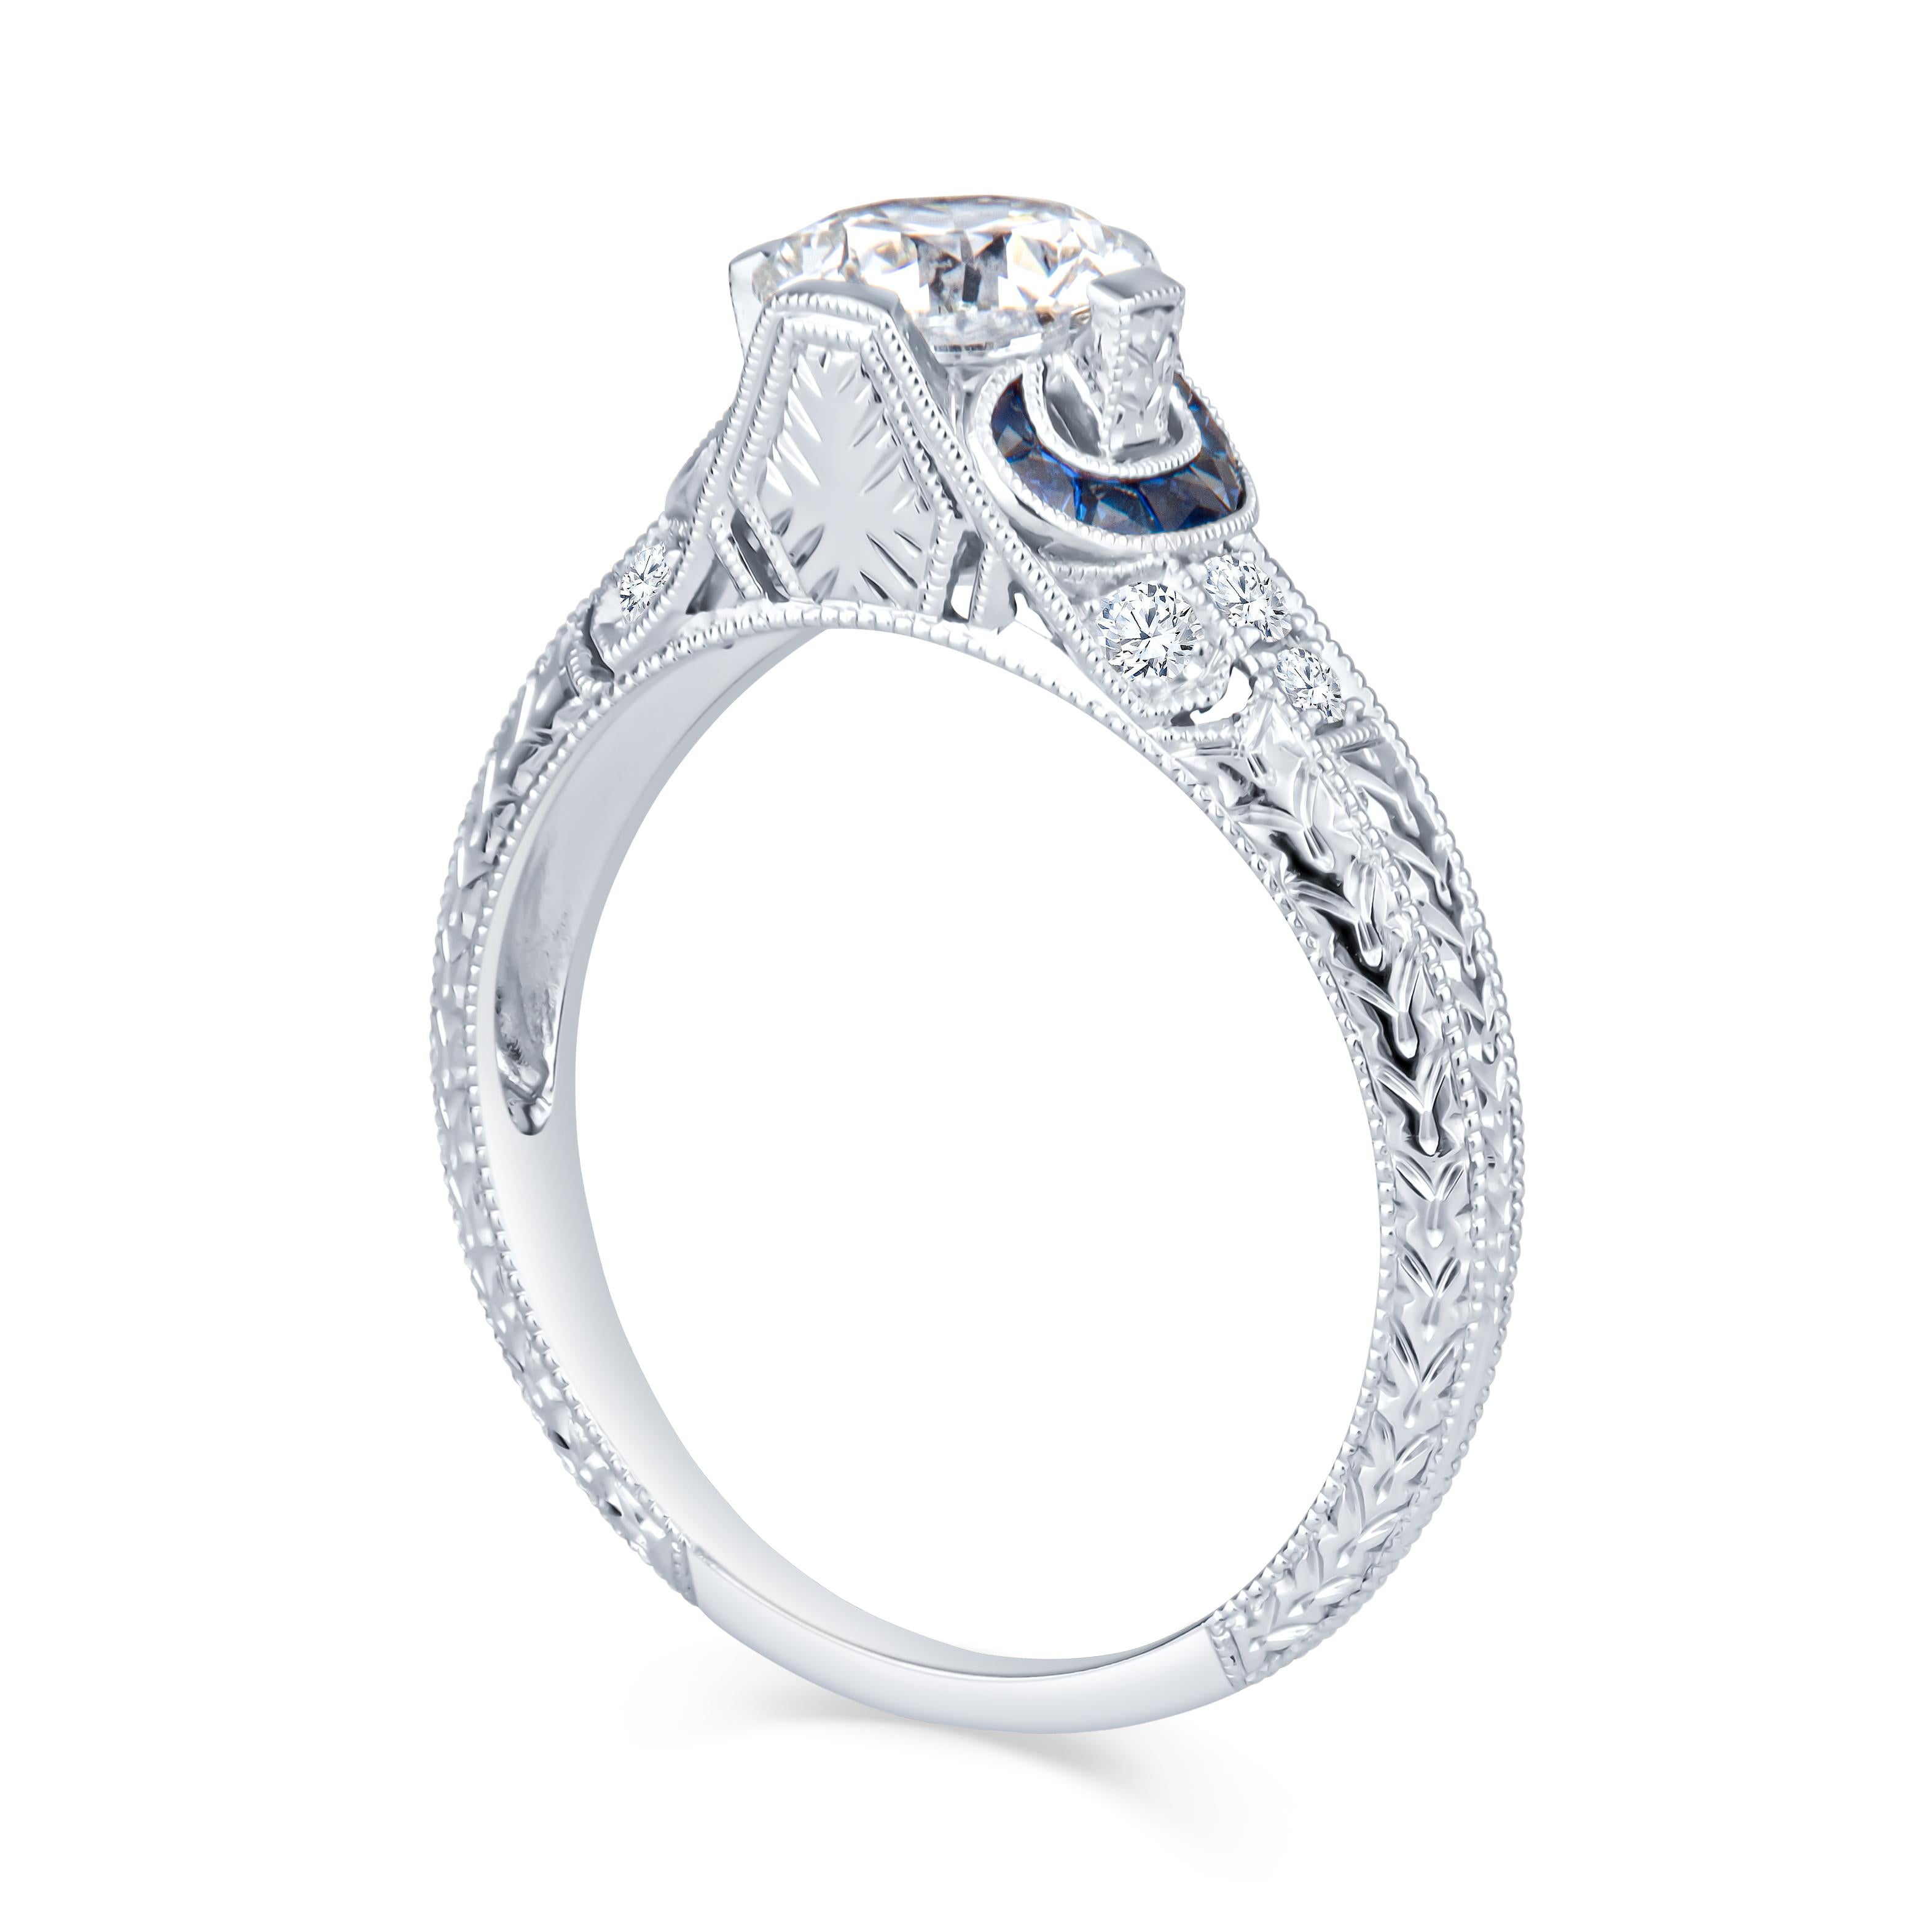 diamond engagement ring with sapphire accents